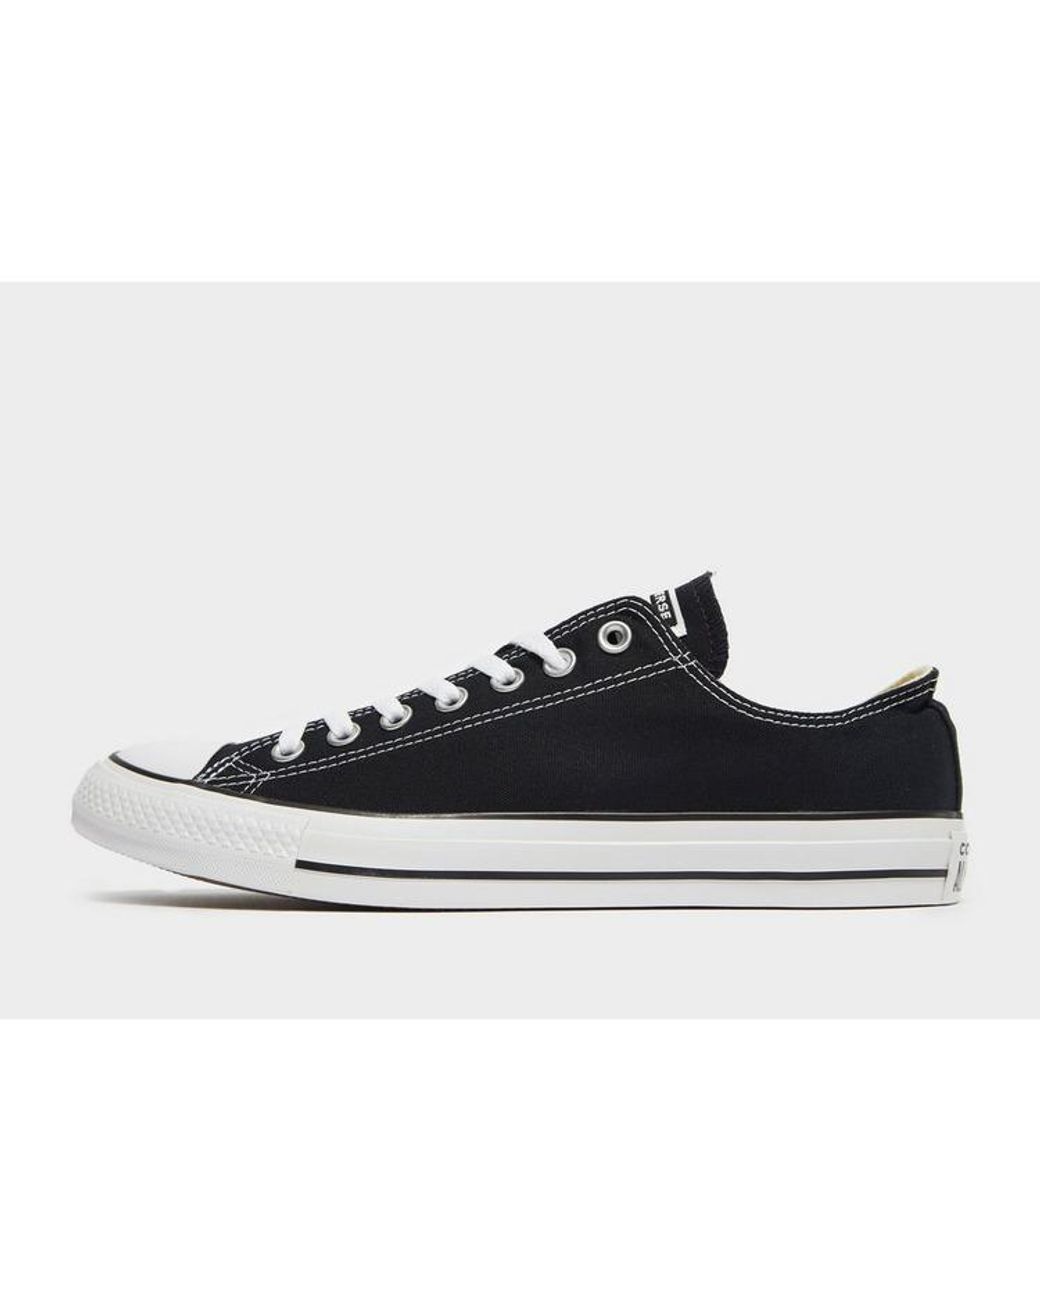 Converse Canvas Chuck Taylor All Star Ox in Black for Men - Lyst